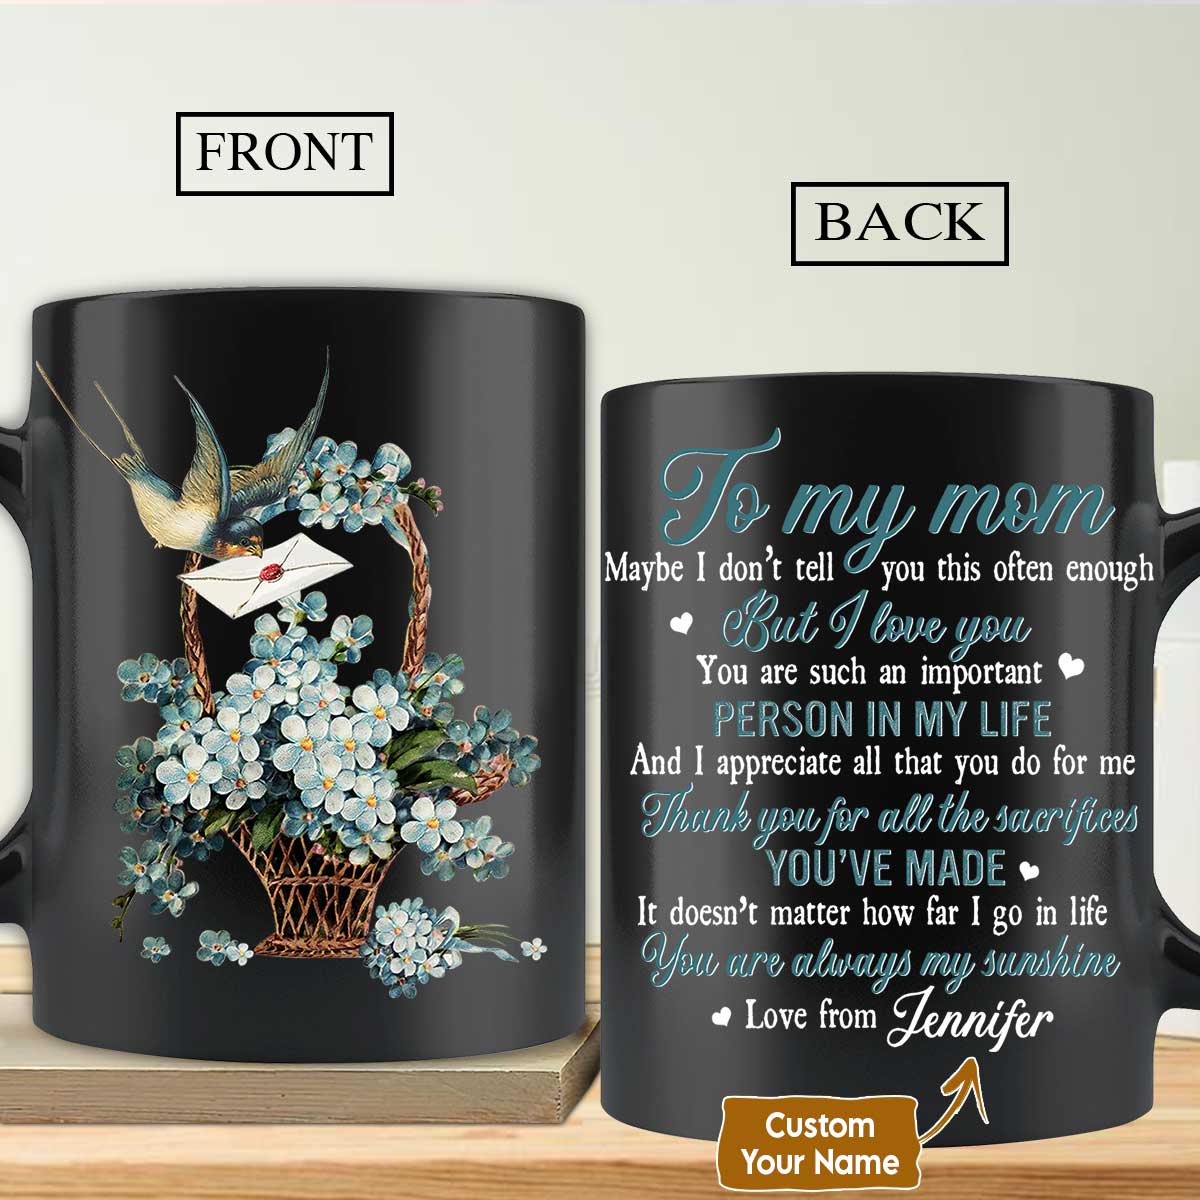 Gift For Mom Personalized Mug - Son to mom, Cherry blossom flowers, White letter Mug - Custom Gift For Mother's Day, Presents for Mom